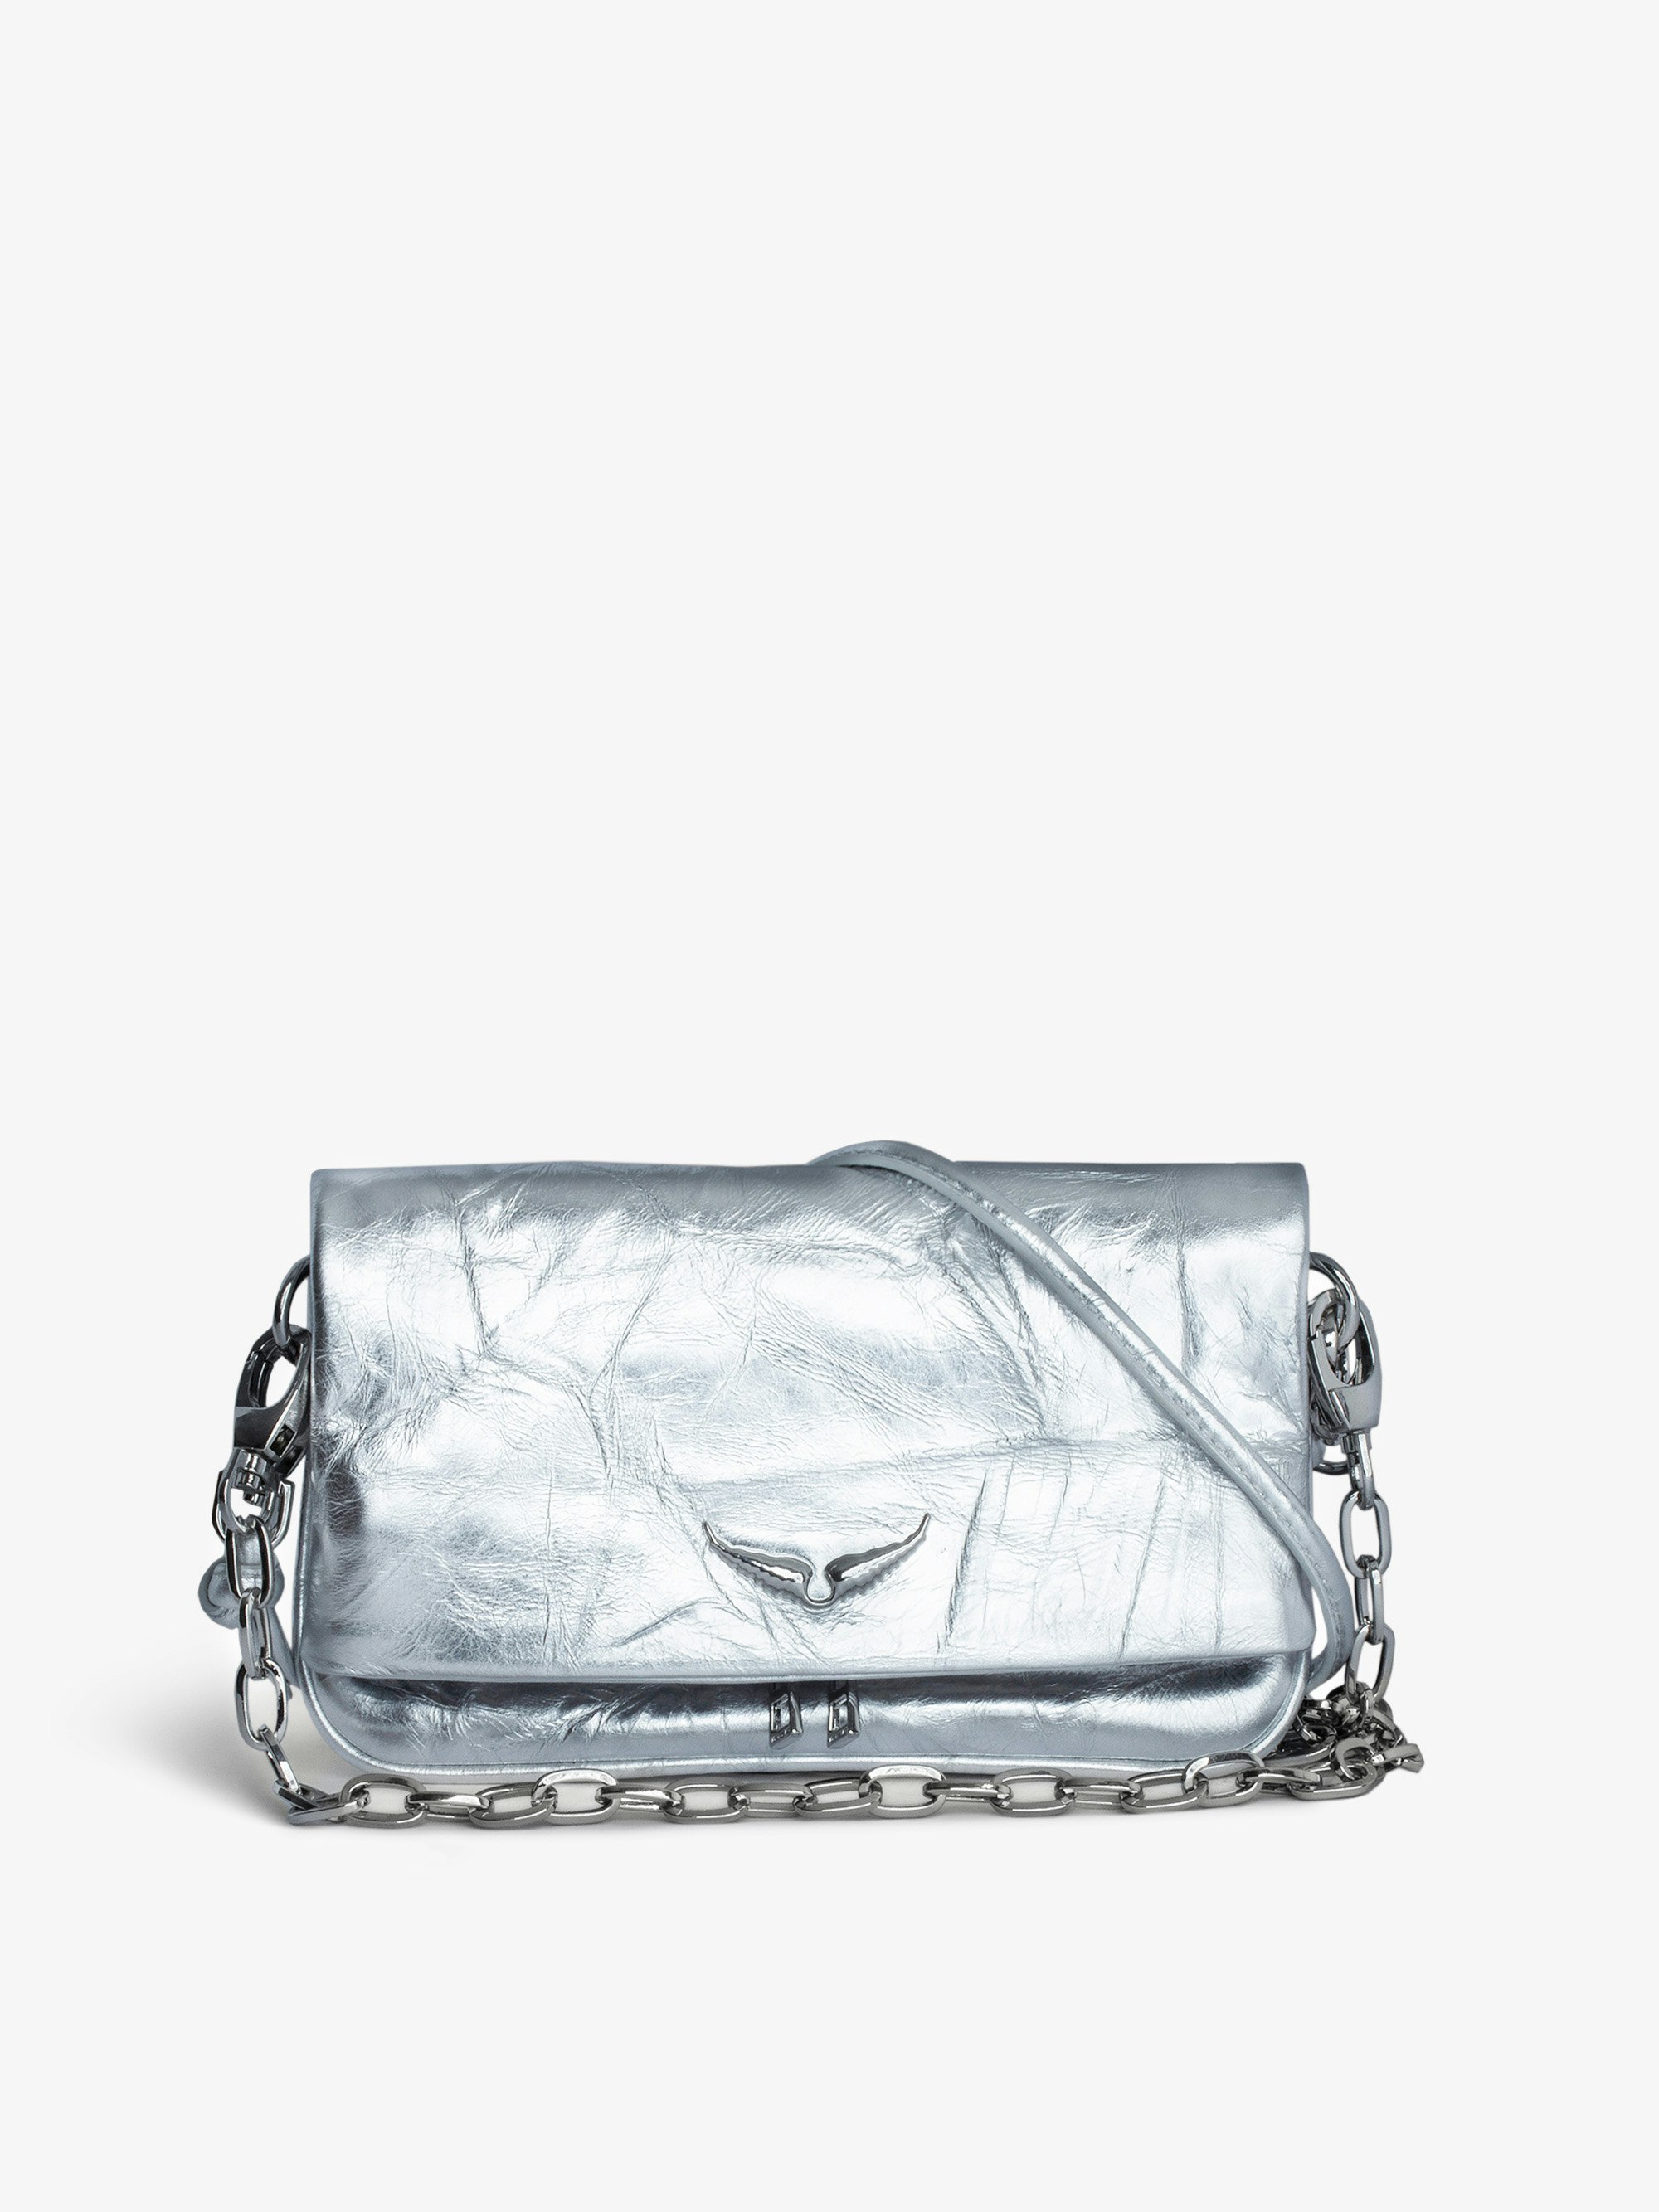 Rock Nano Eternal Metallic Clutch - Rock Nano small silver metallic crinkled leather clutch with double leather and chain strap.